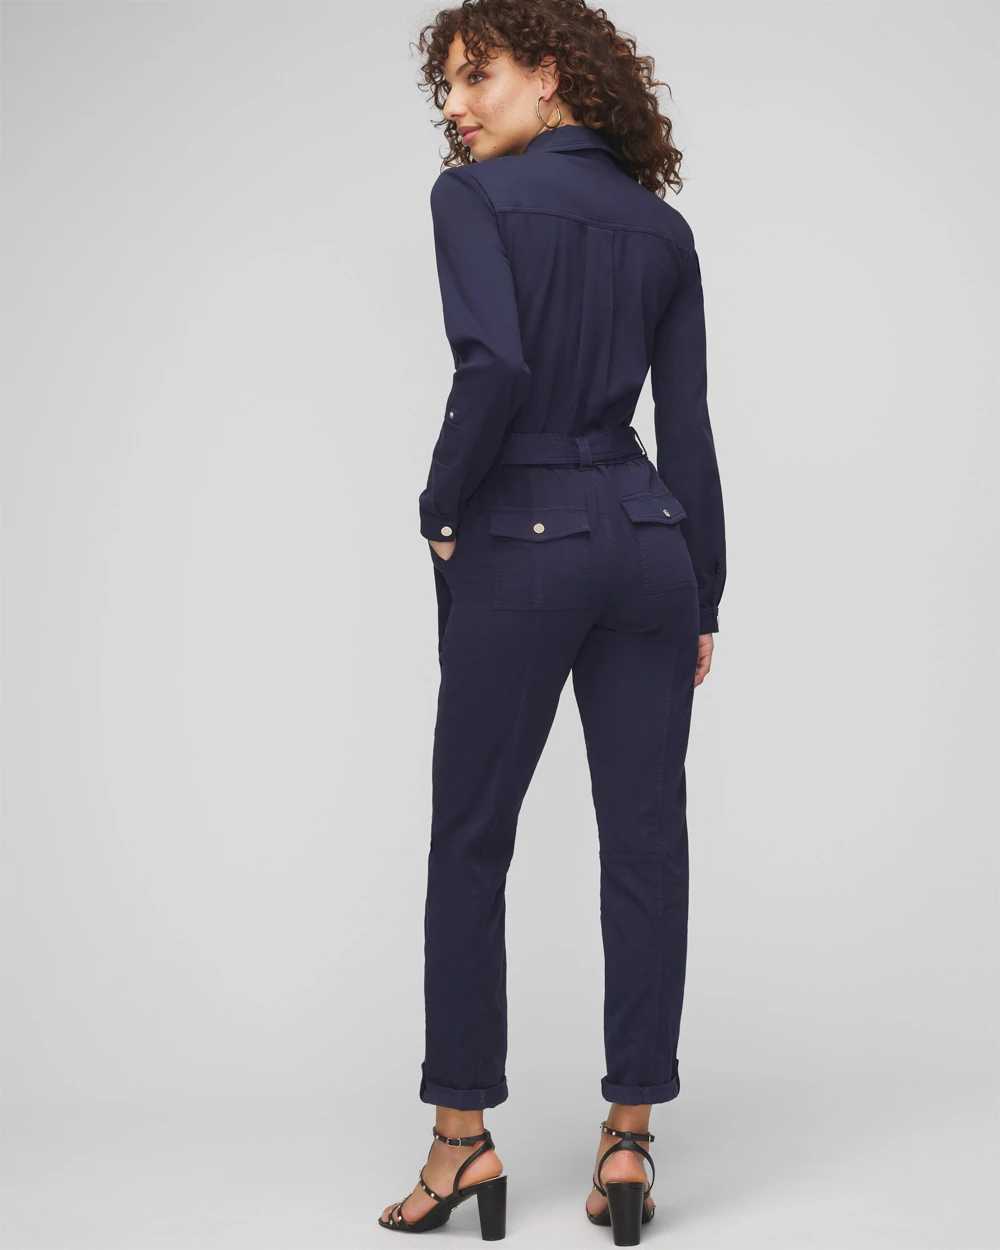 Petite Long Sleeve Utility Jumpsuit click to view larger image.